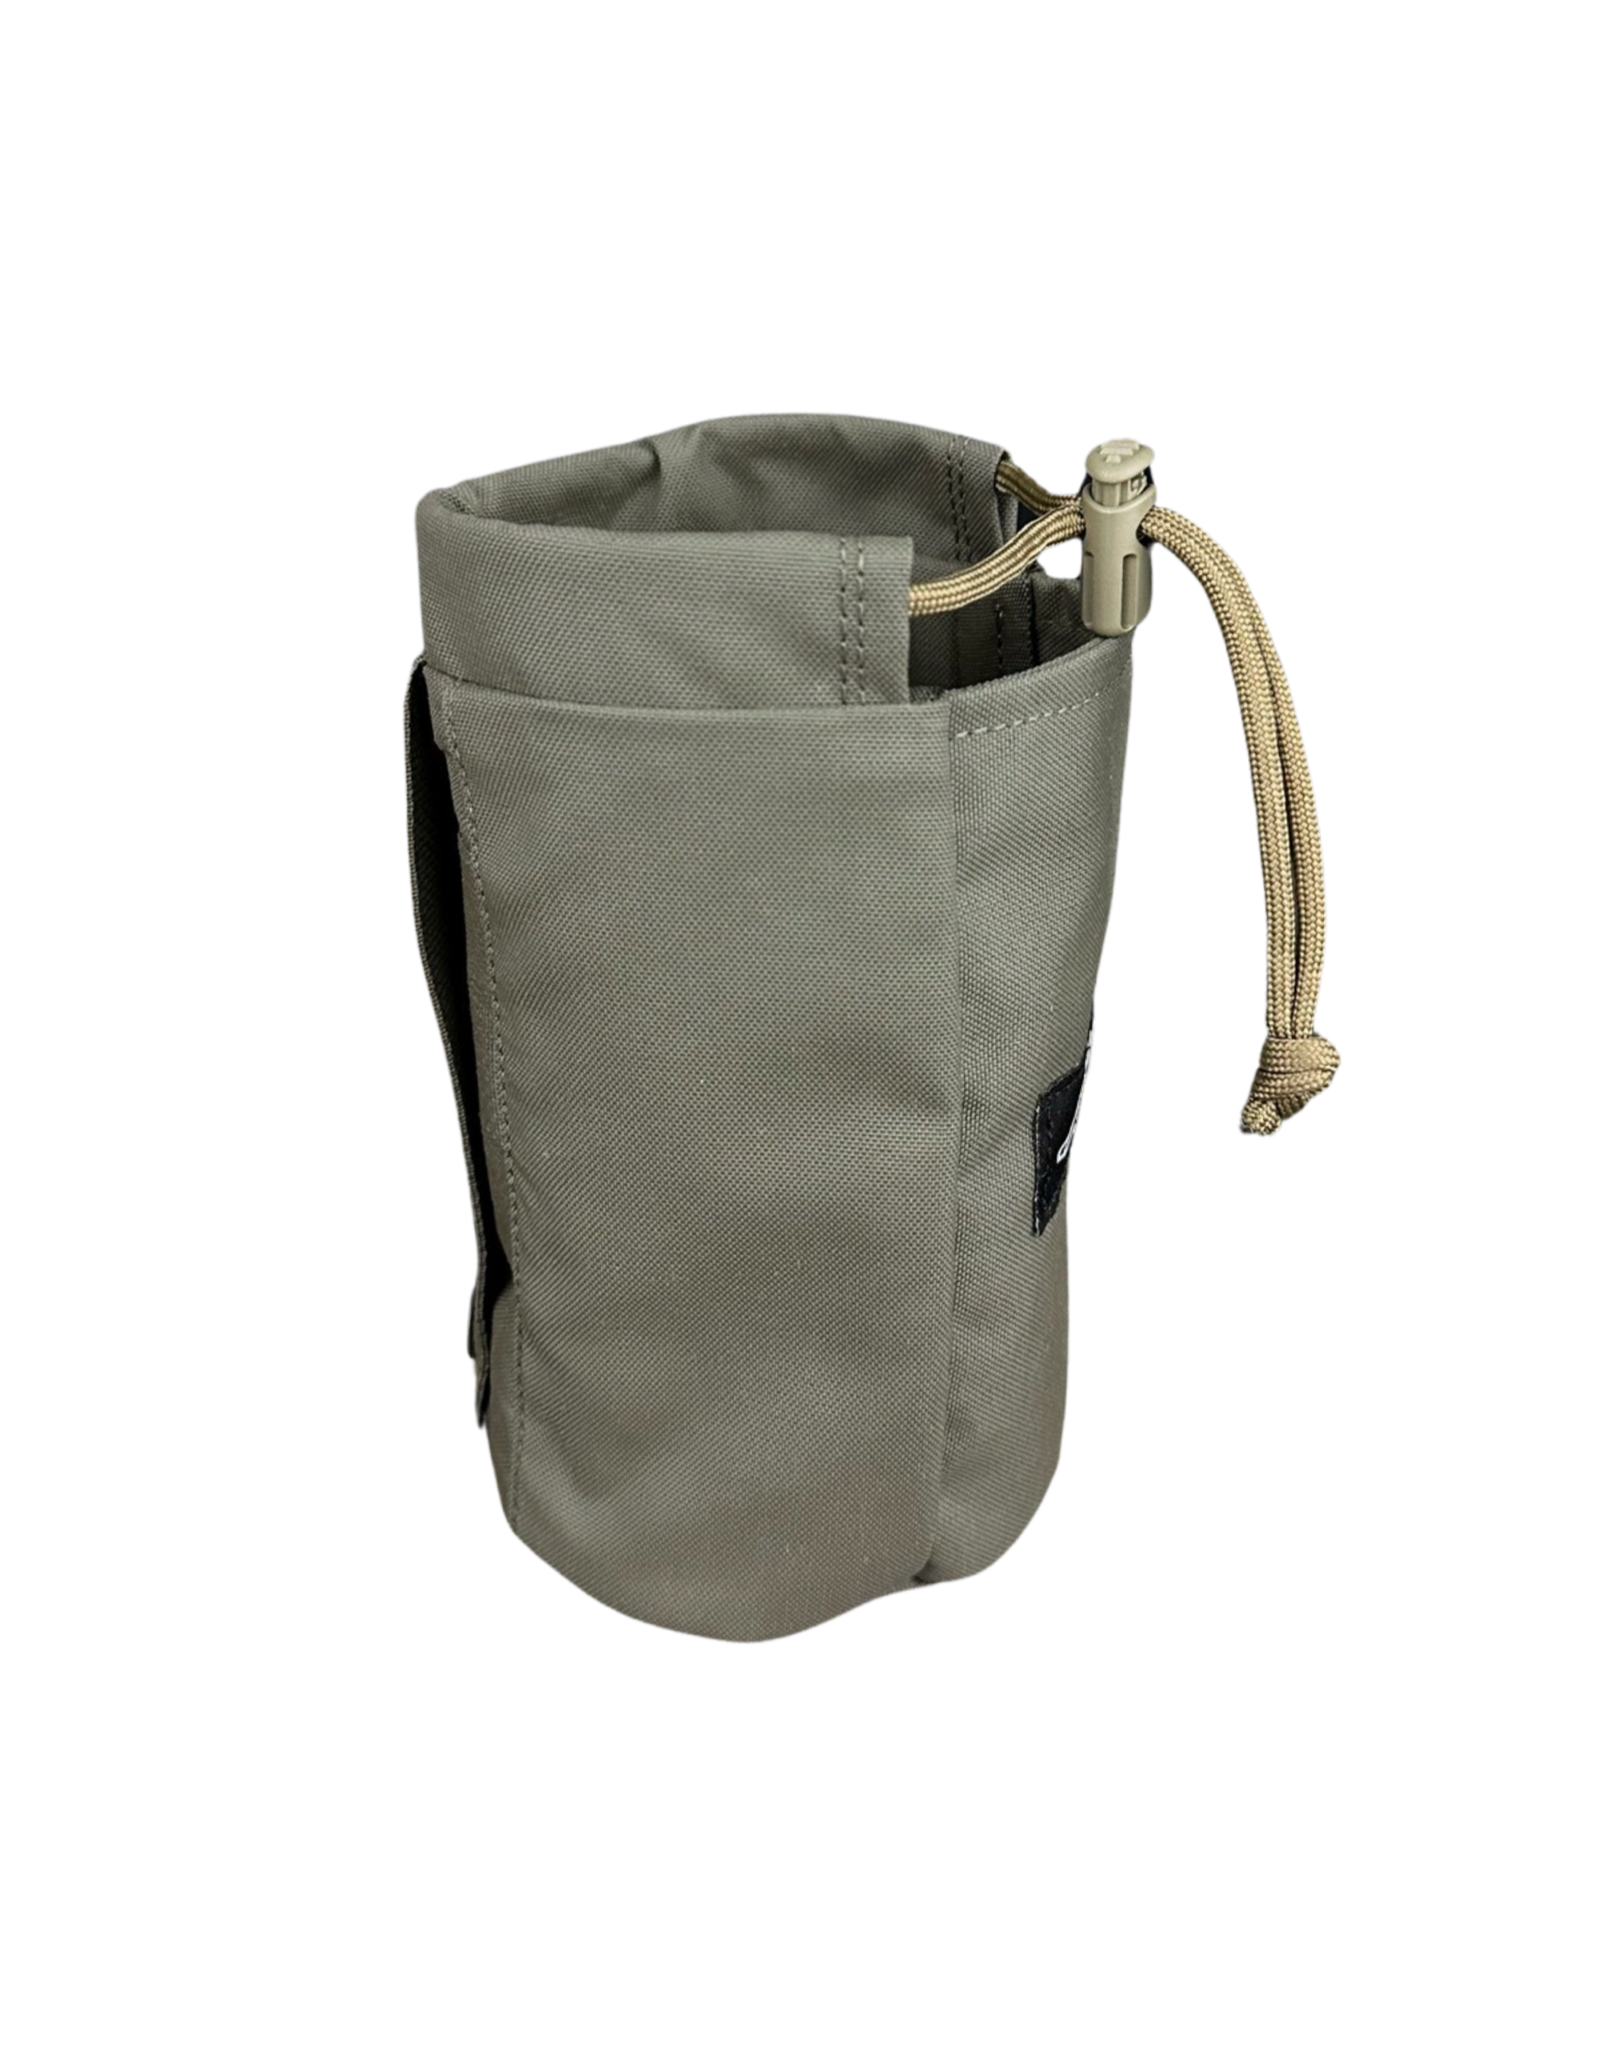 32 Oz Wide Mouth, Nylon Water Bottle Carrier Bag